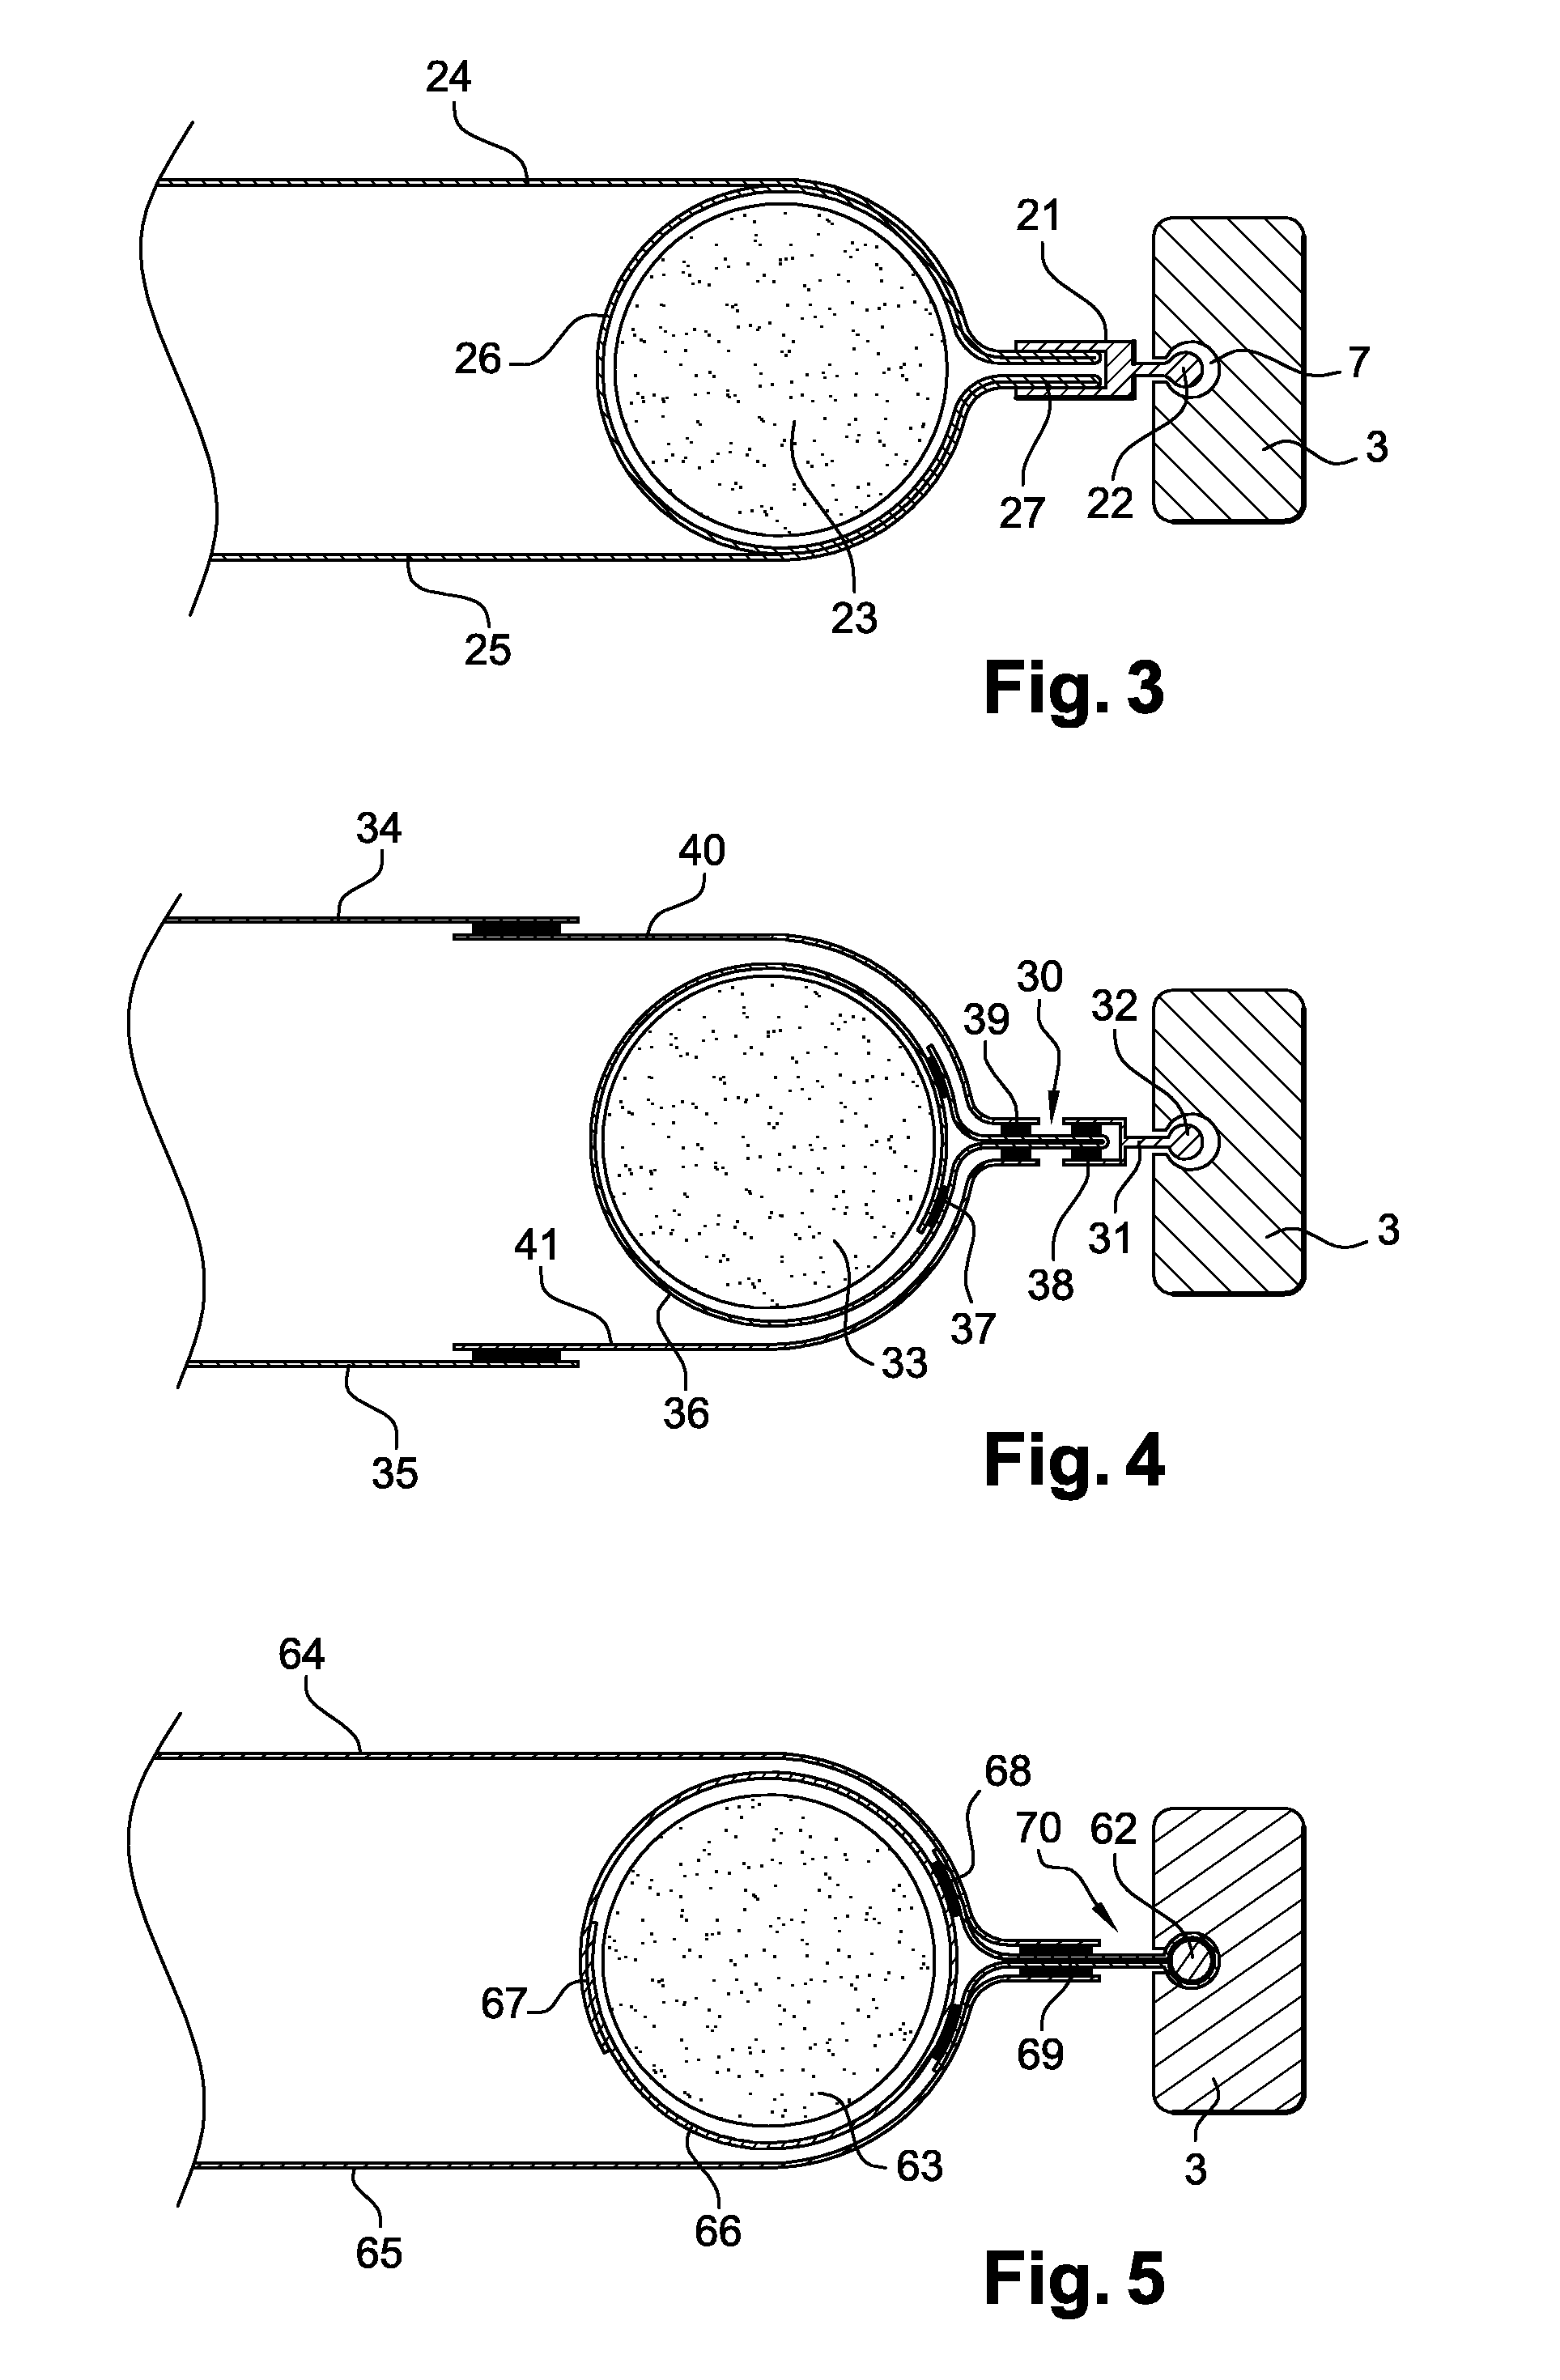 Flexible dual skin wall and device for tensioning a dual skin flexible wall